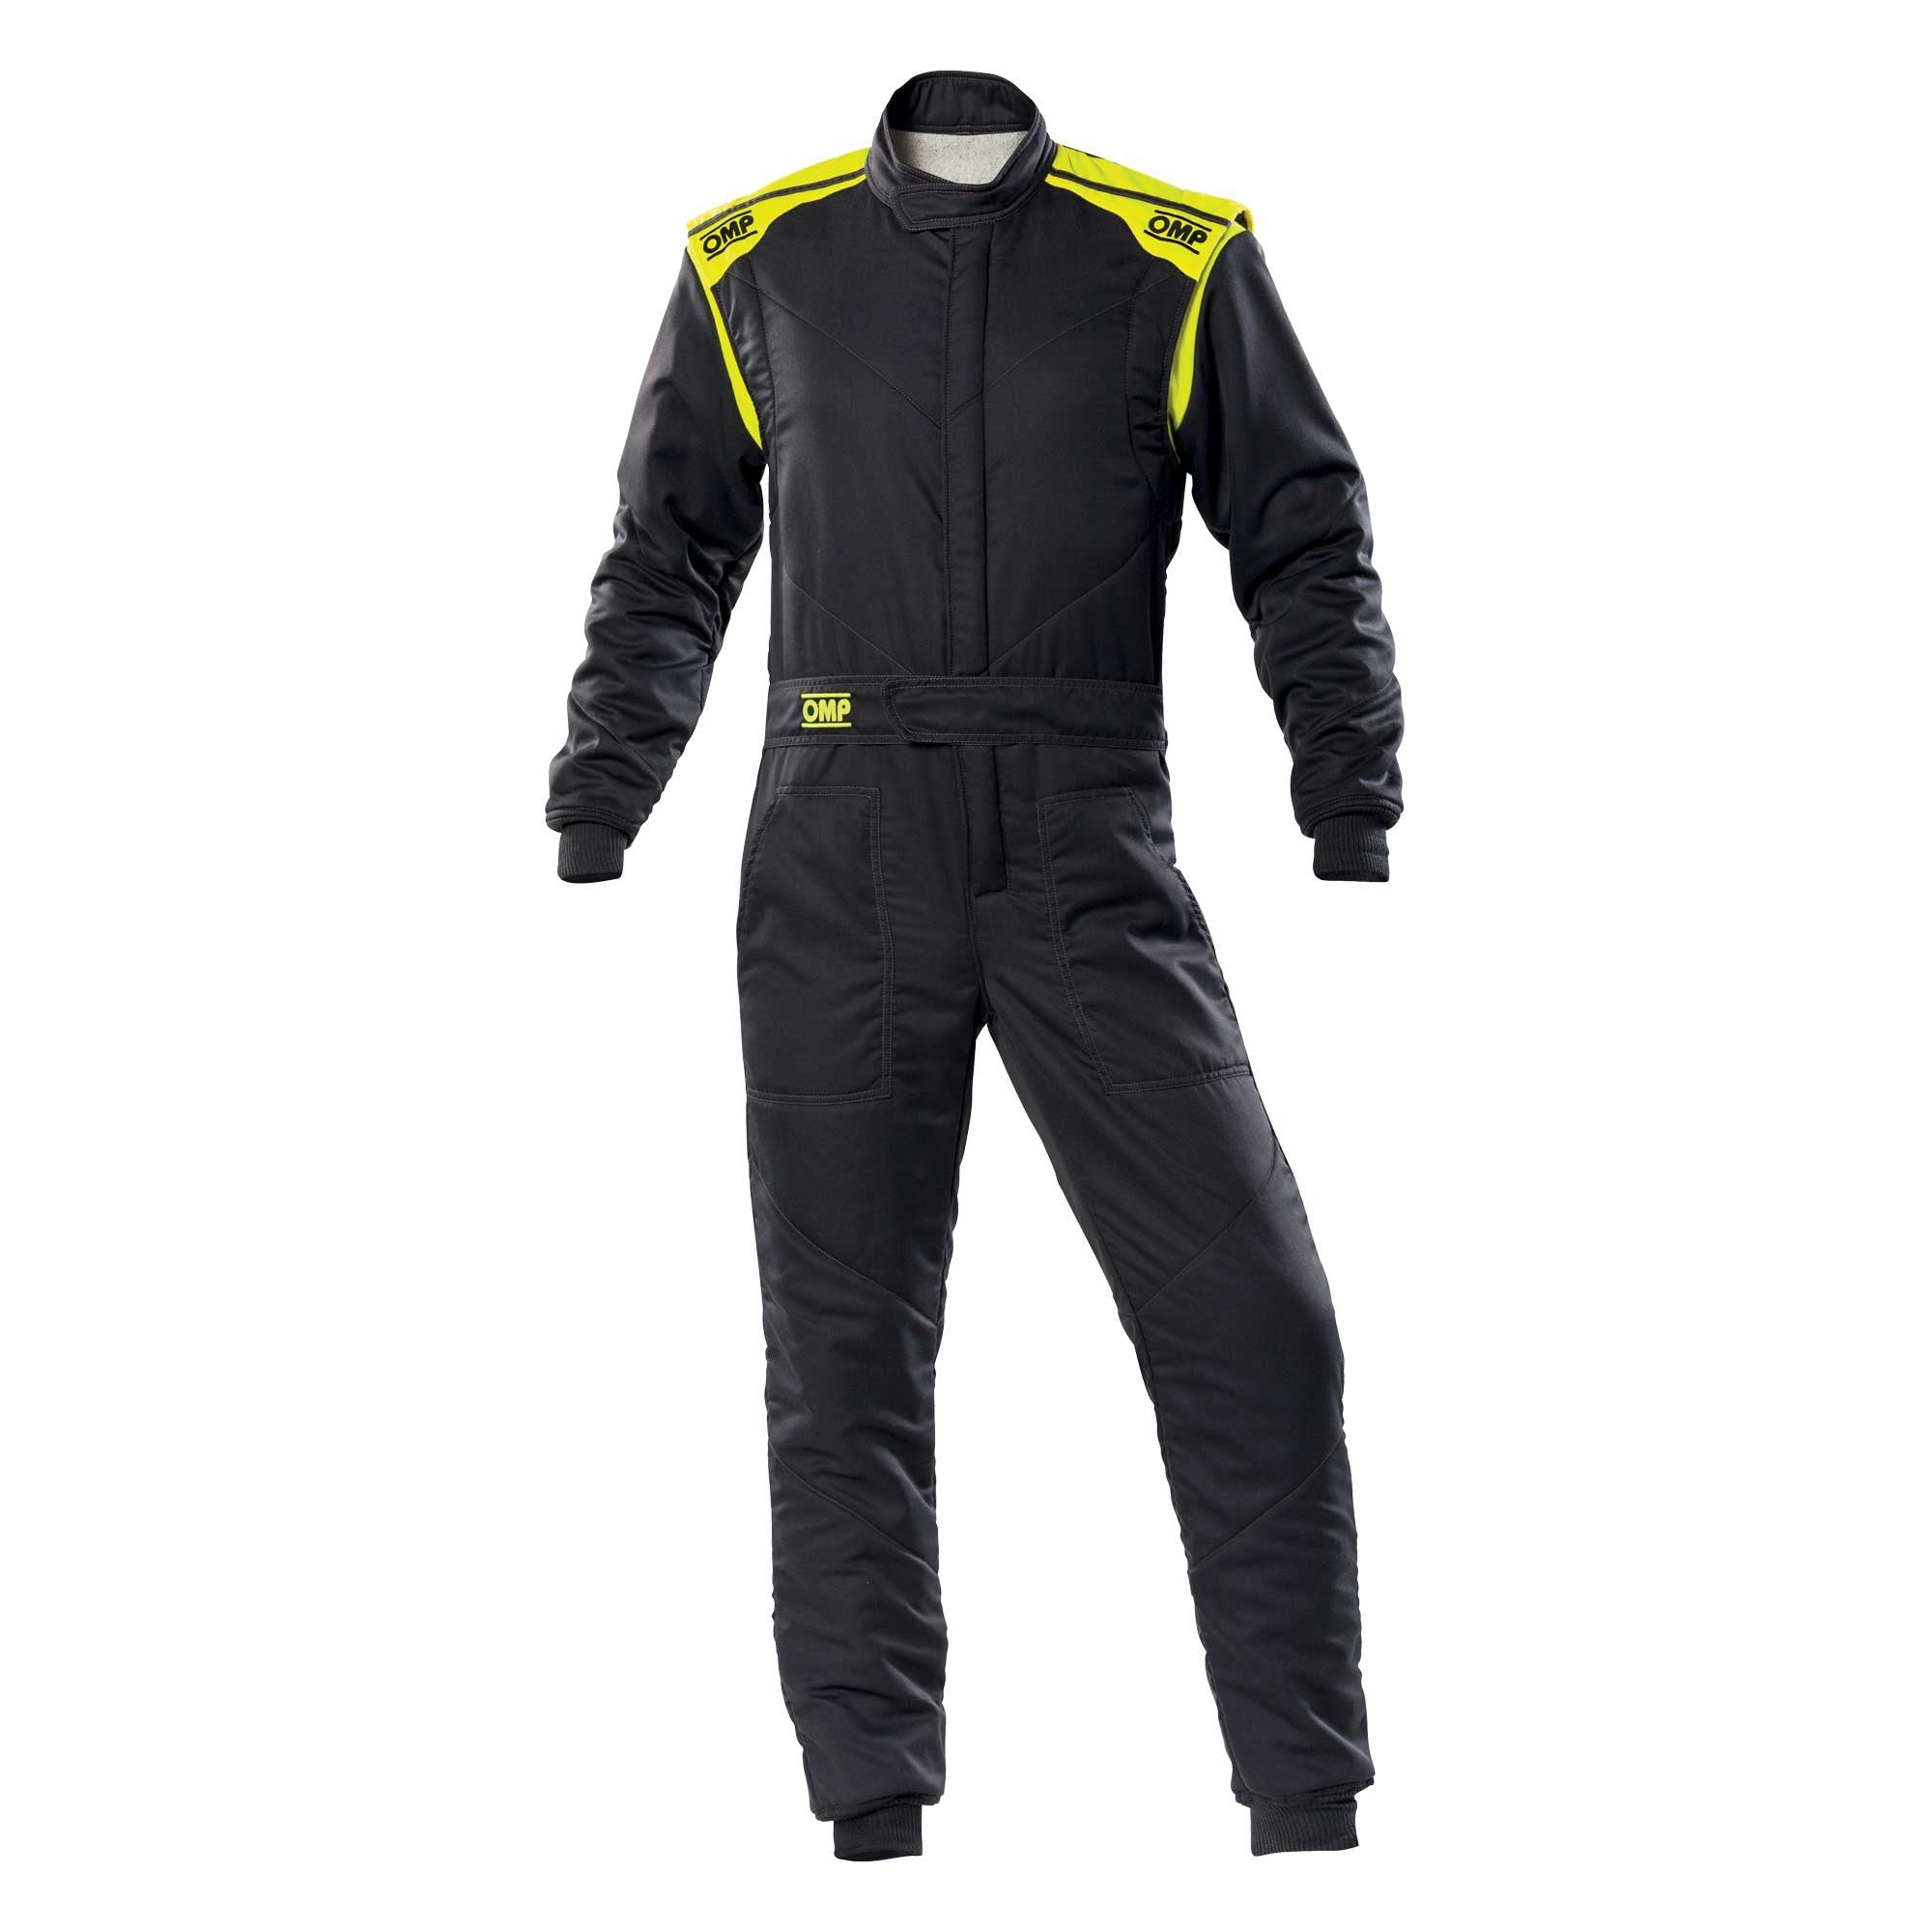 OMP First-S Racing Suit